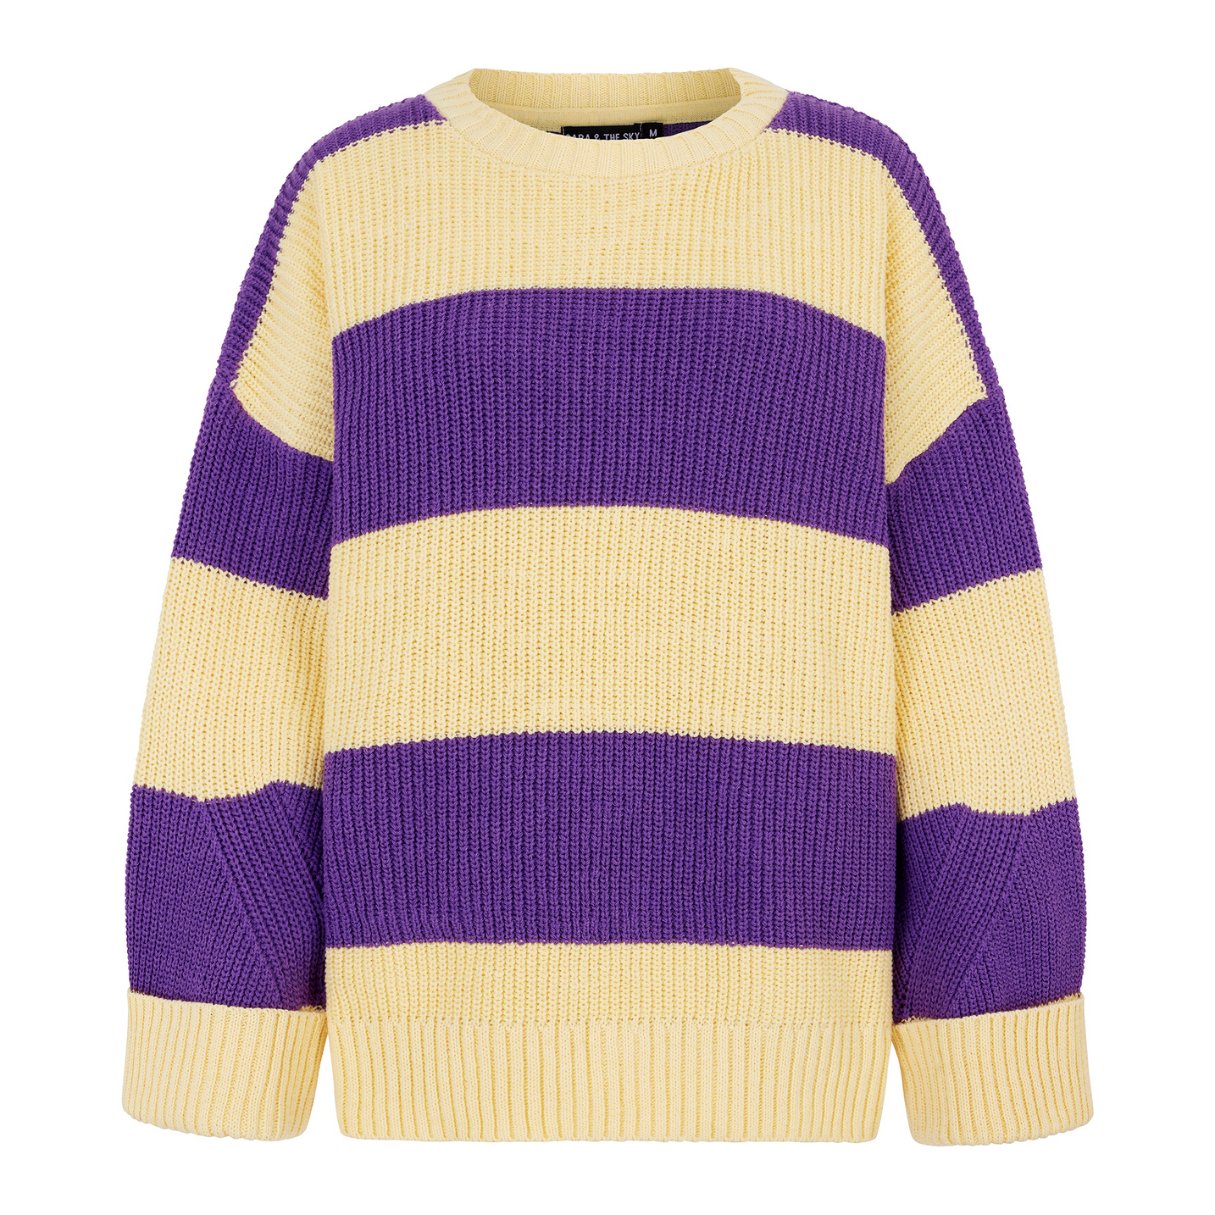 rhiannon-recycled-cotton-mix-chunky-stripe-jumper-purple-and-yellowcara-the-sky-502423.jpg